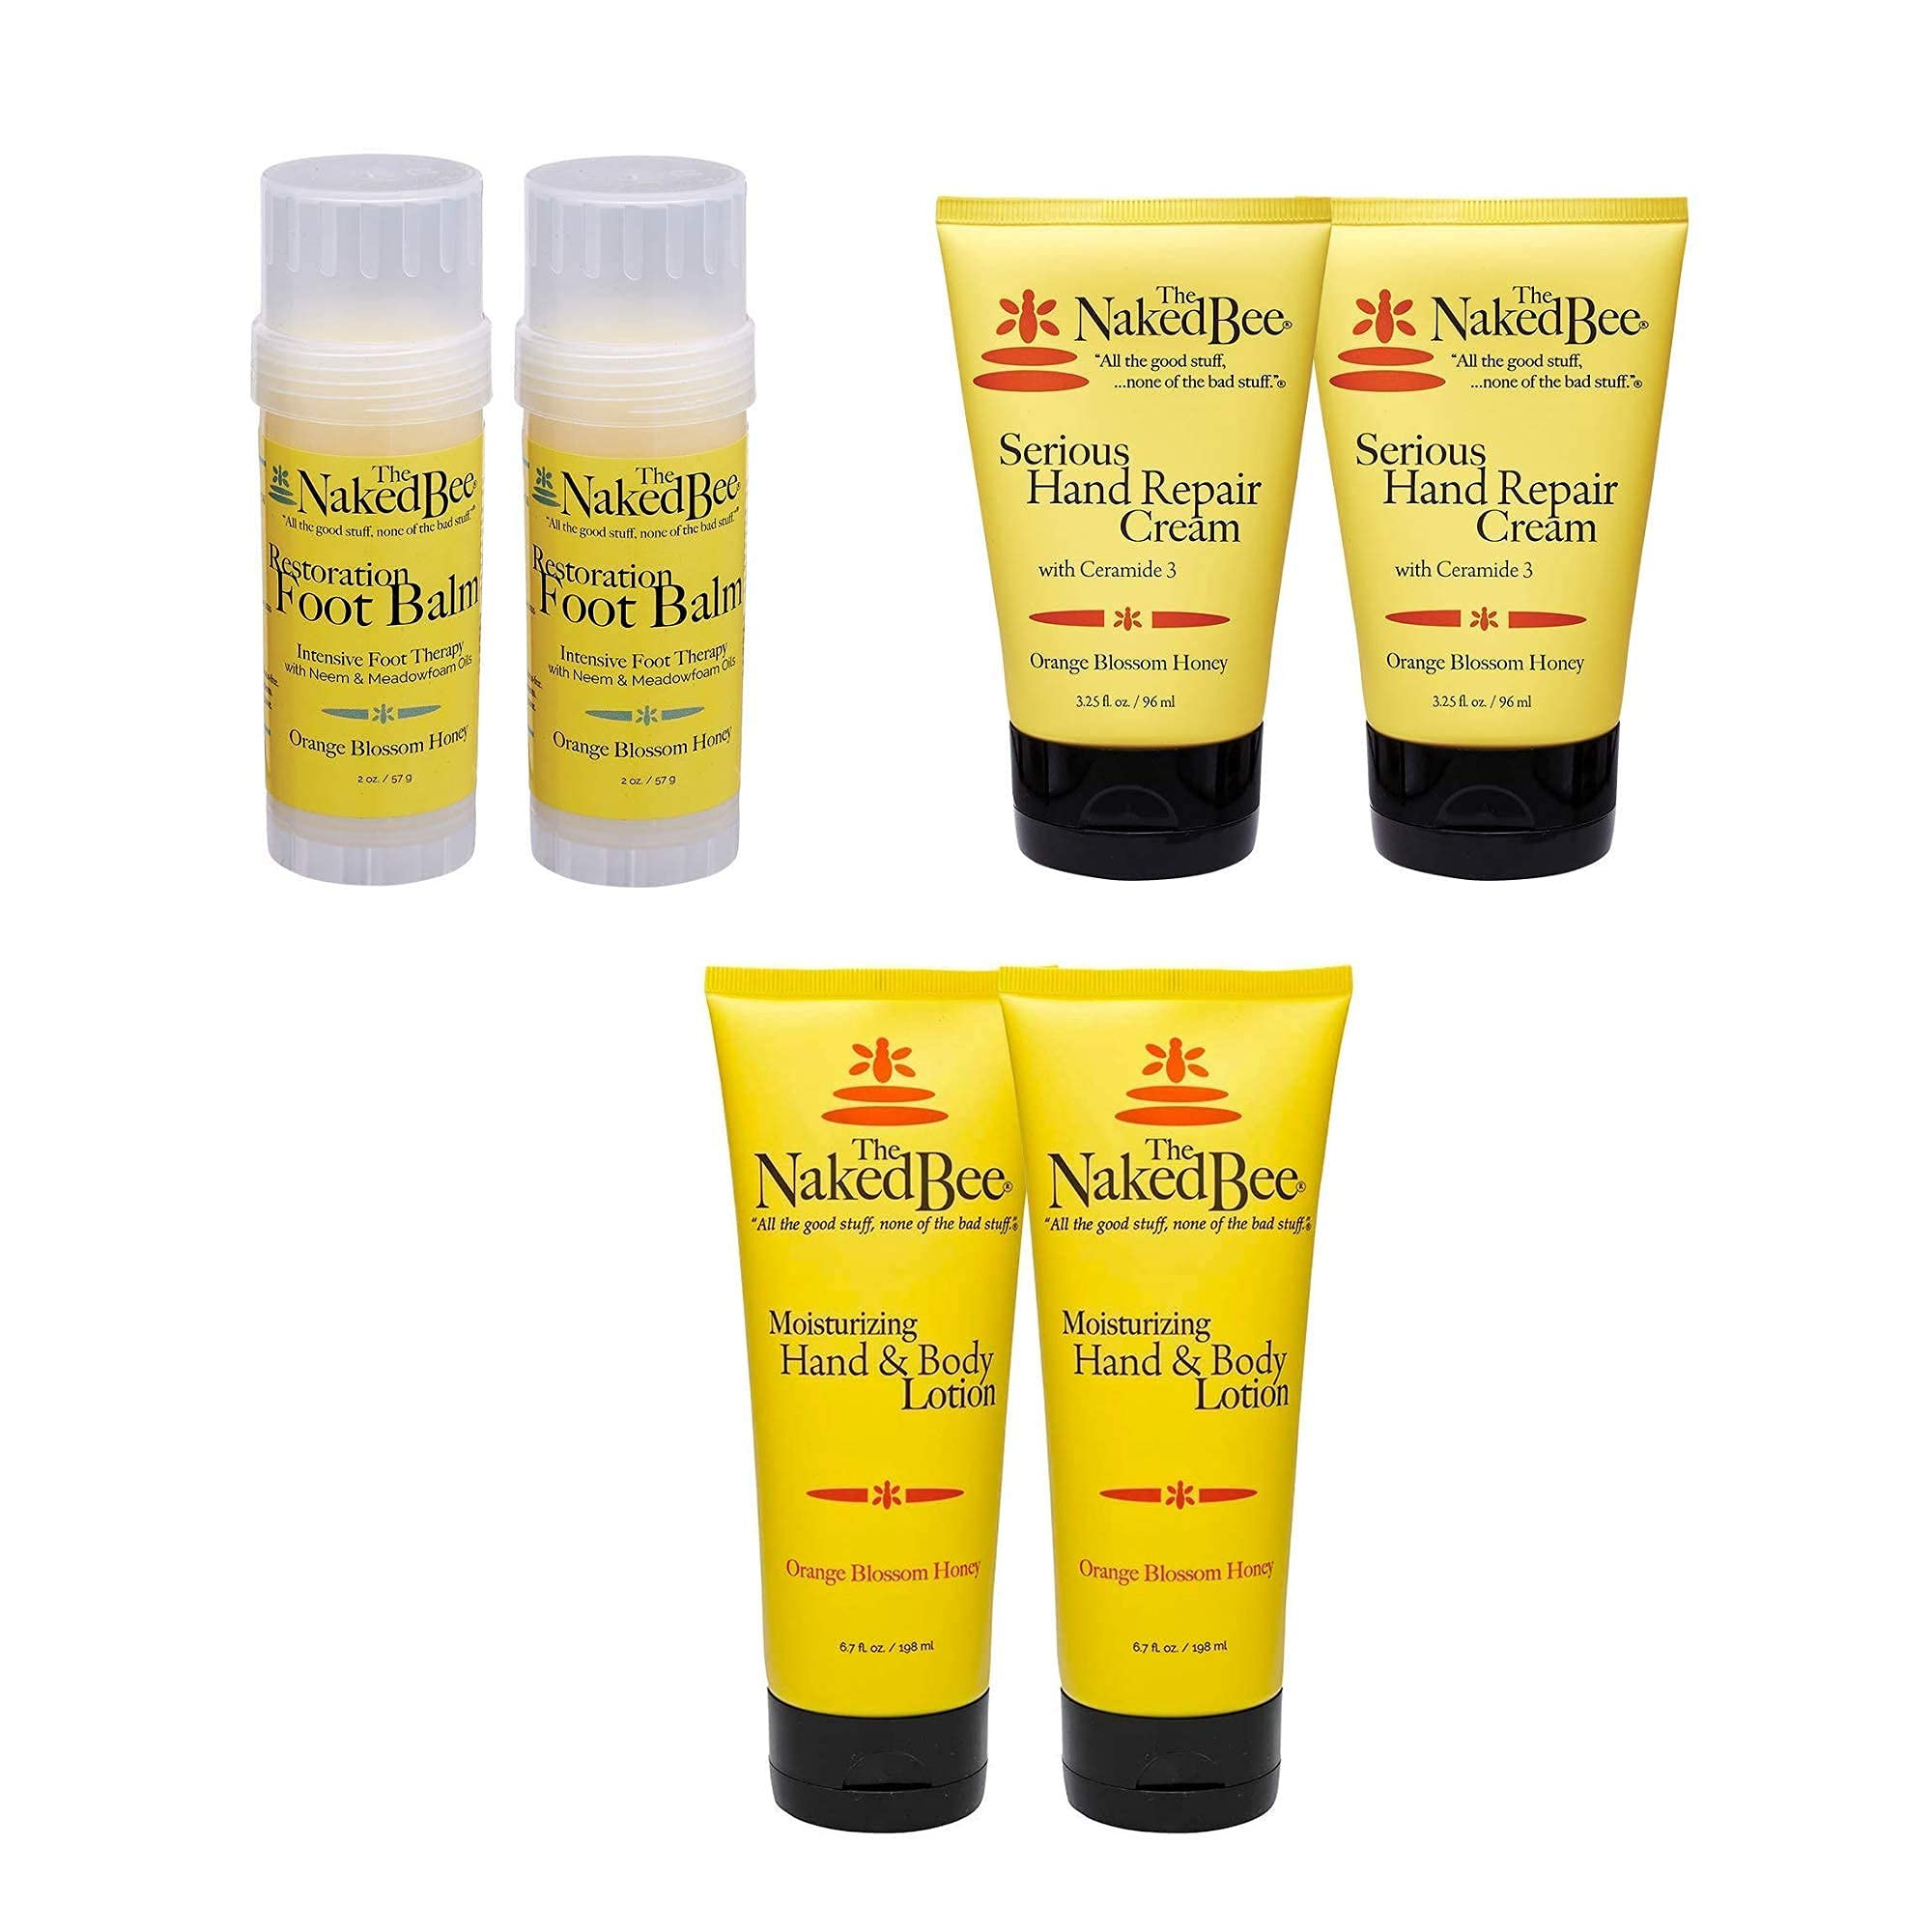 The Naked Bee Blossom Honey Restoration Foot Balm 2oz + Hand and Body Lotion 6.7oz+ Serious Hand Repair Cream Lotion